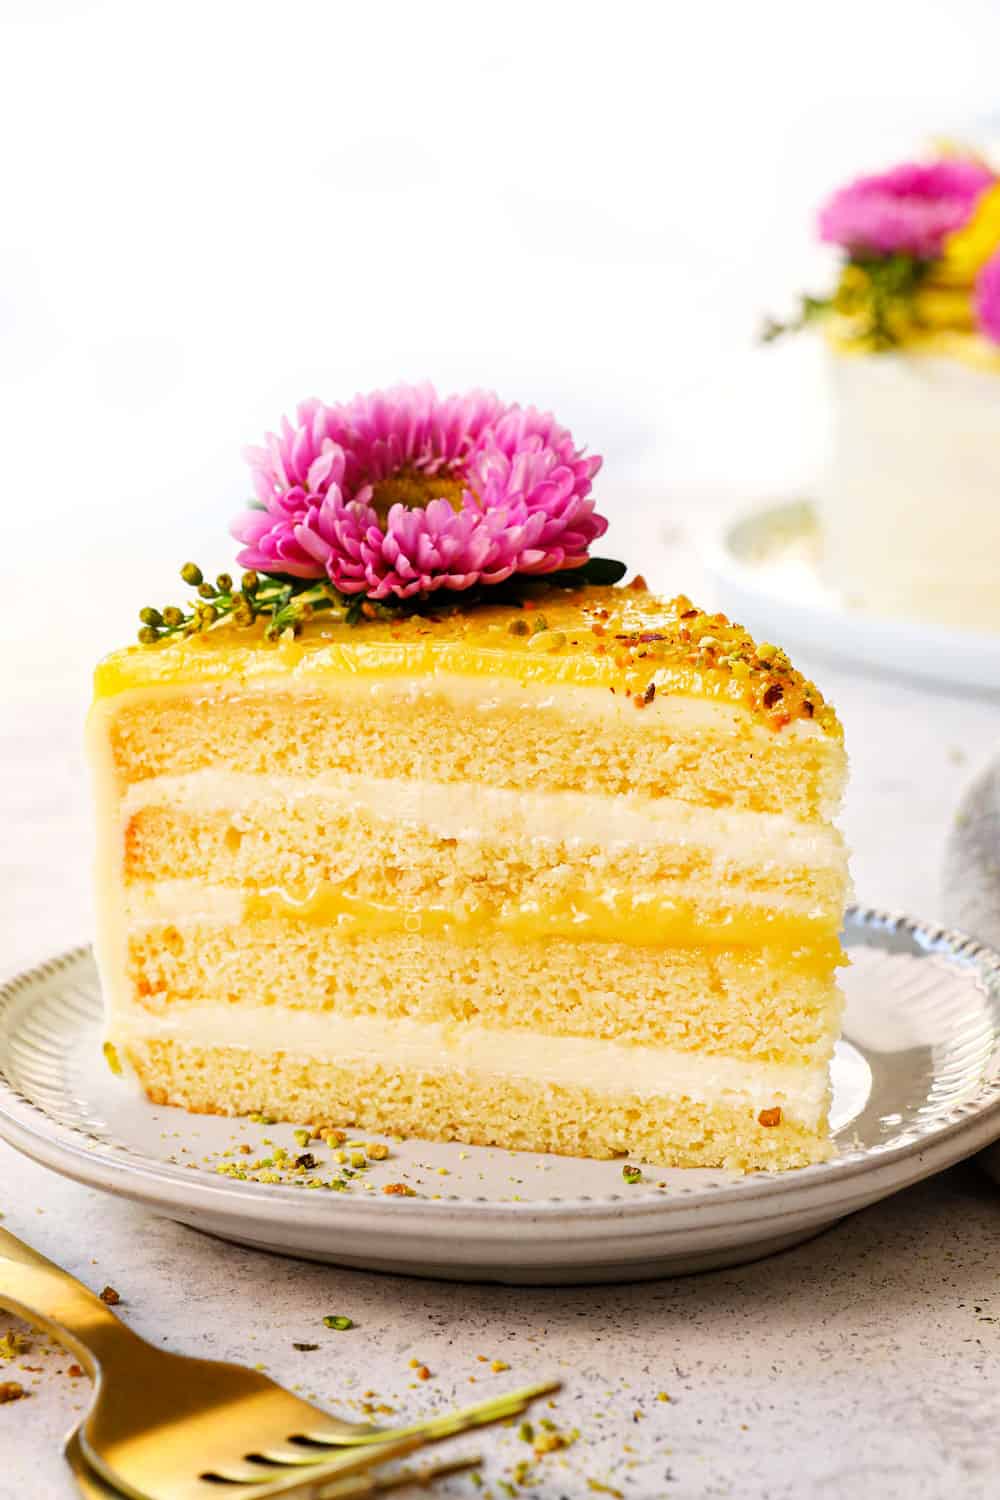 a slice of lemon cake on a plate showing the moist cake layers and lemon curd layers